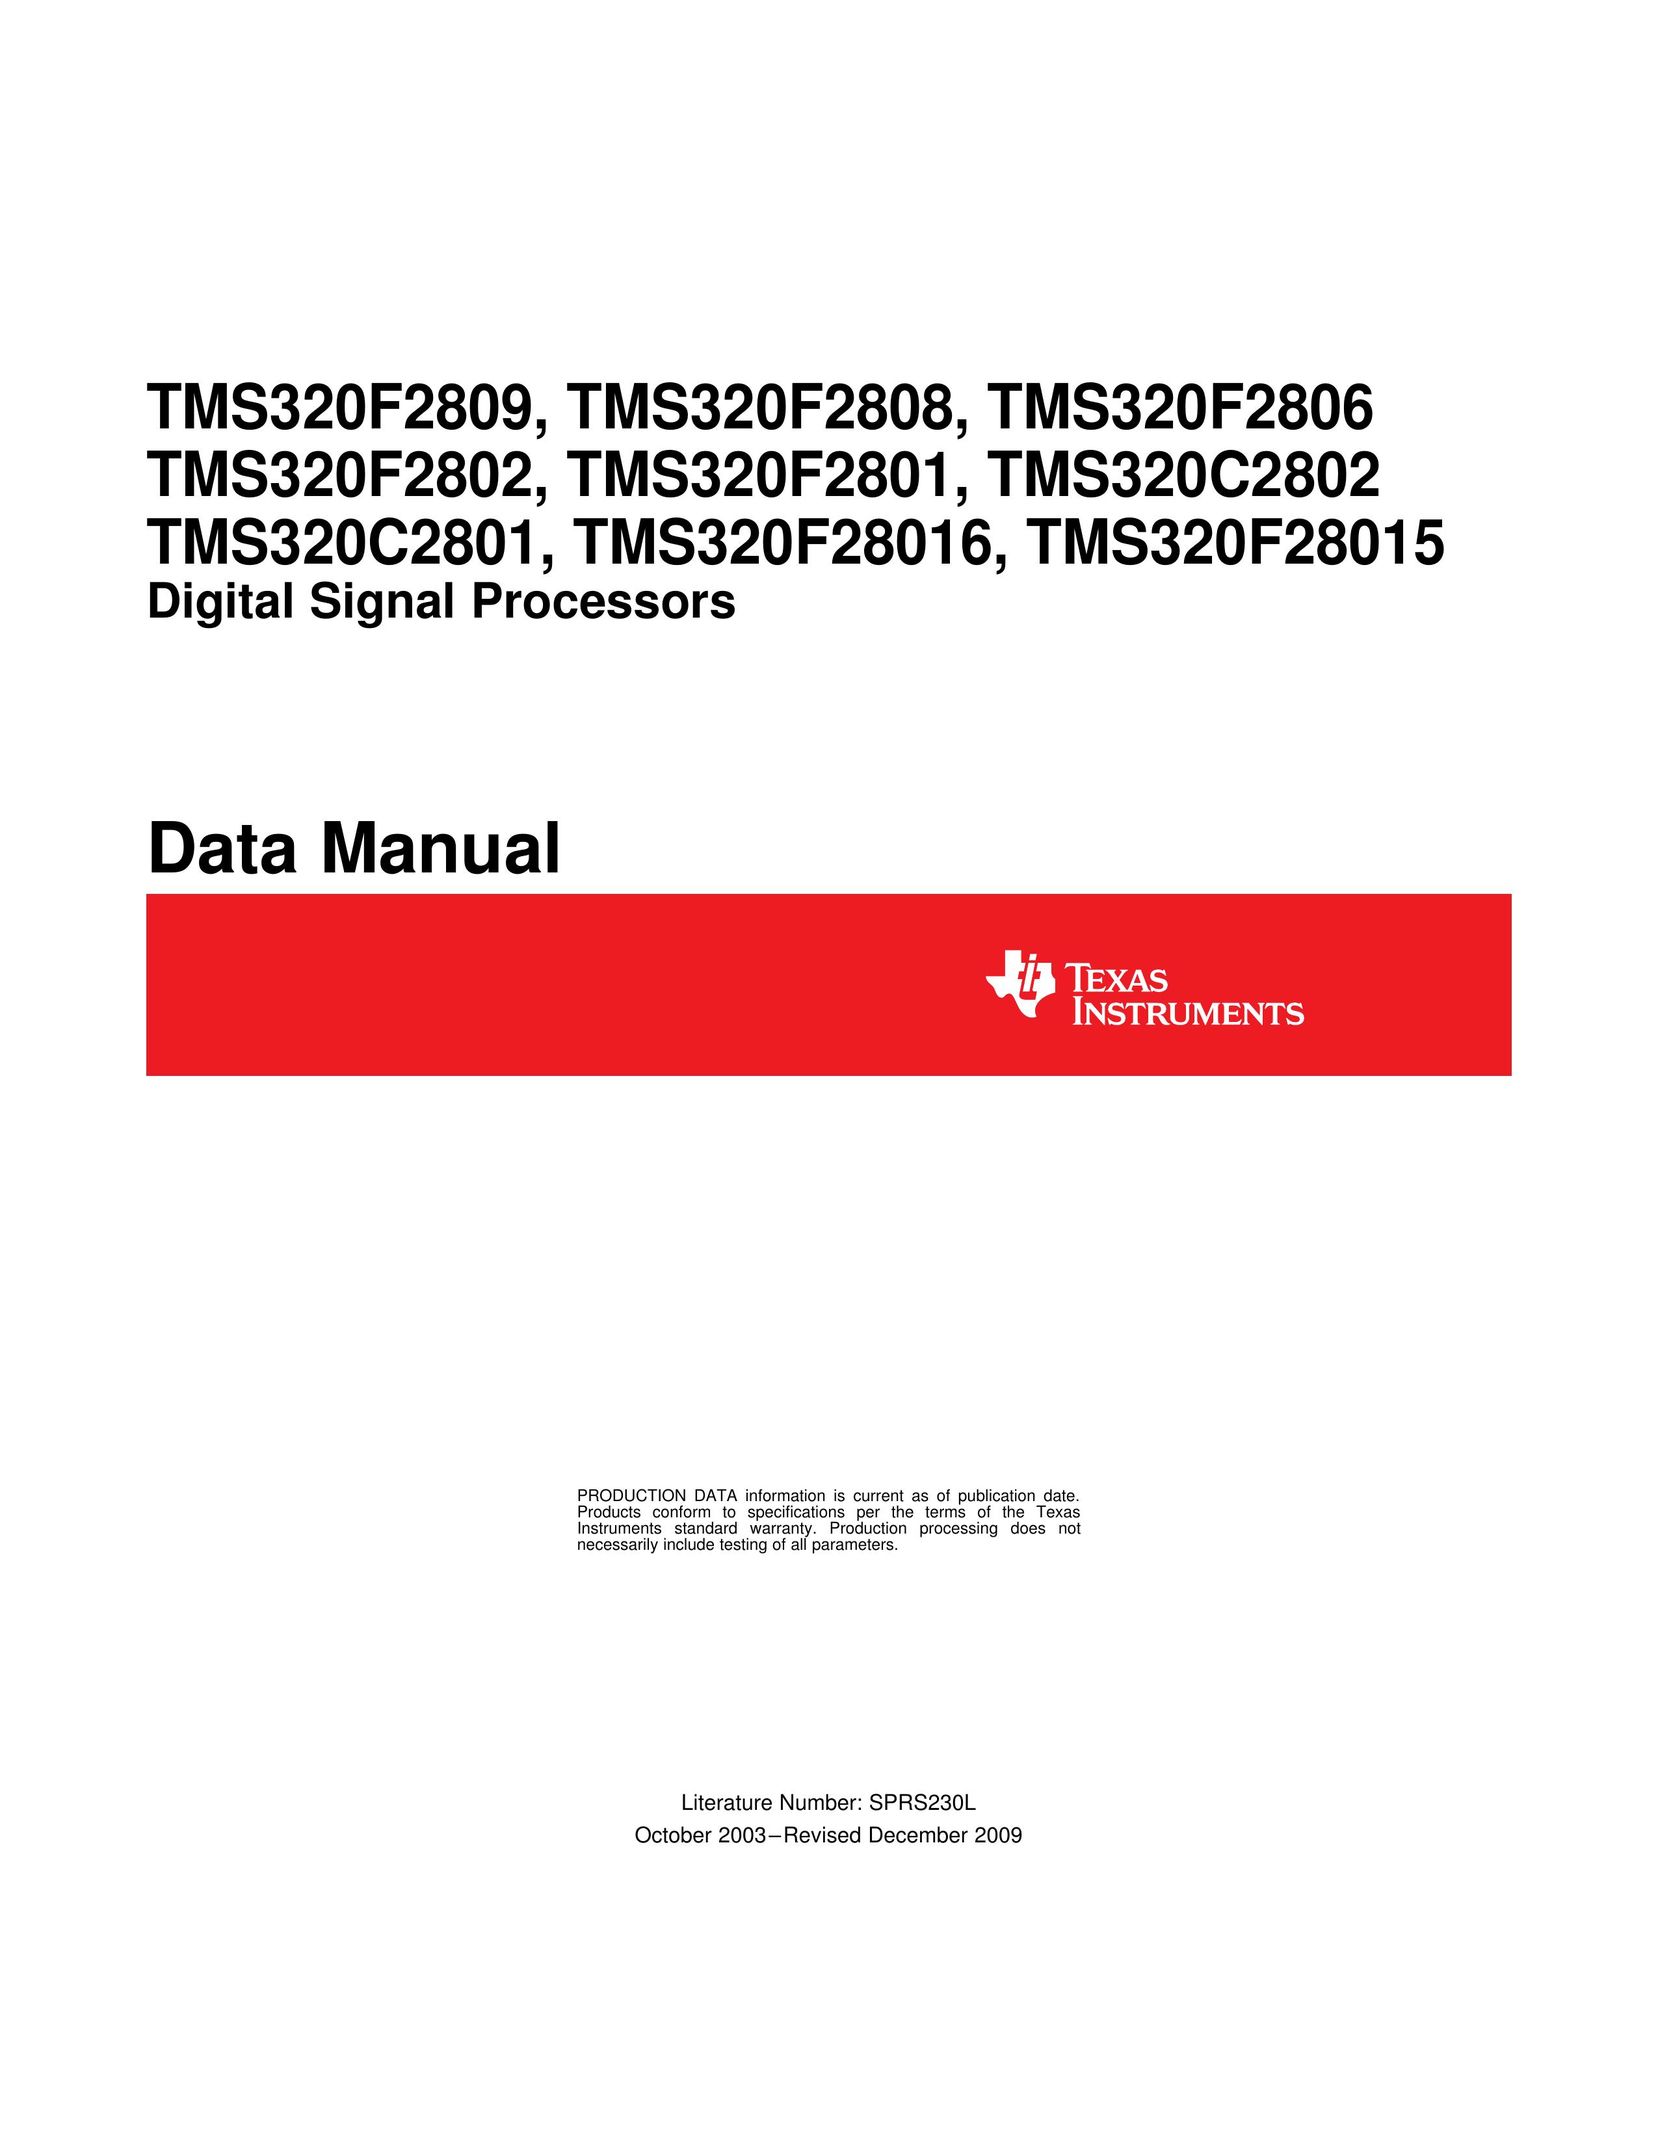 Texas Instruments TMS320C2802 Stereo System User Manual